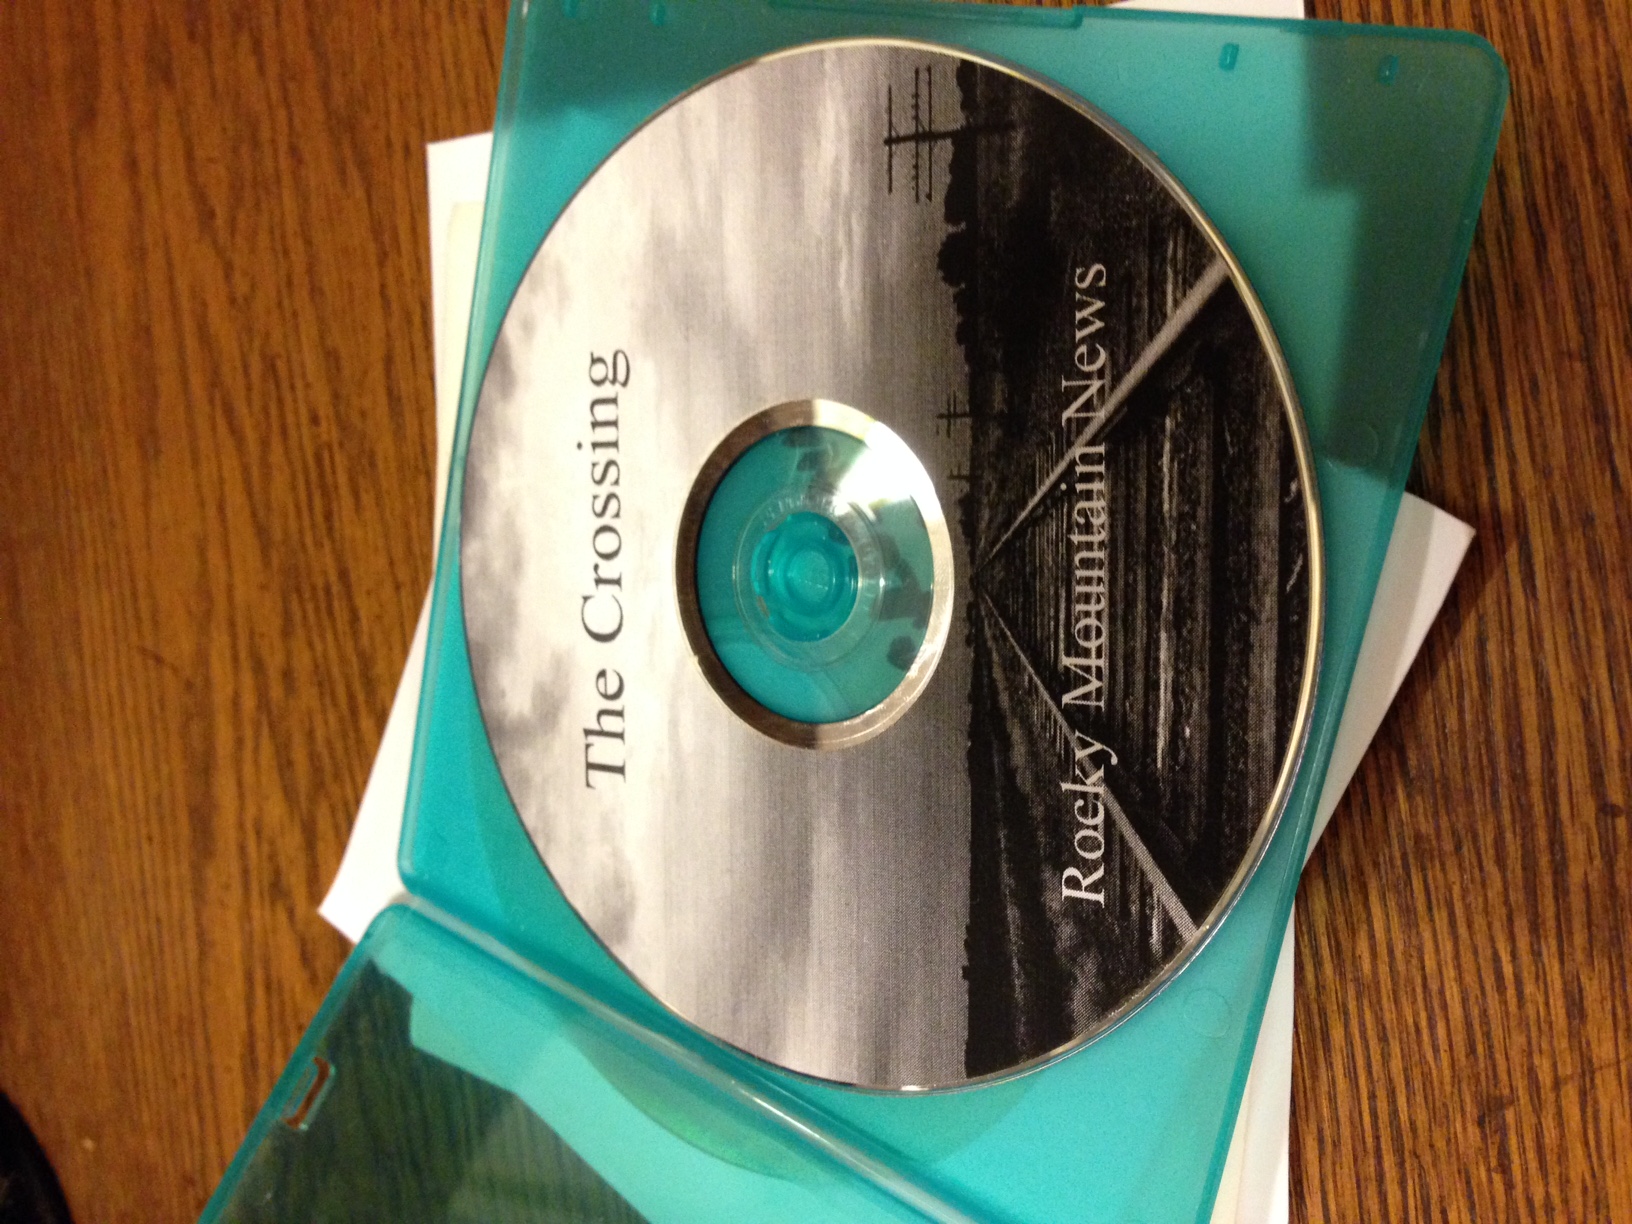 One of Kevin Vaughan's copies of "The Crossing." (Photo by Kevin Vaughan)